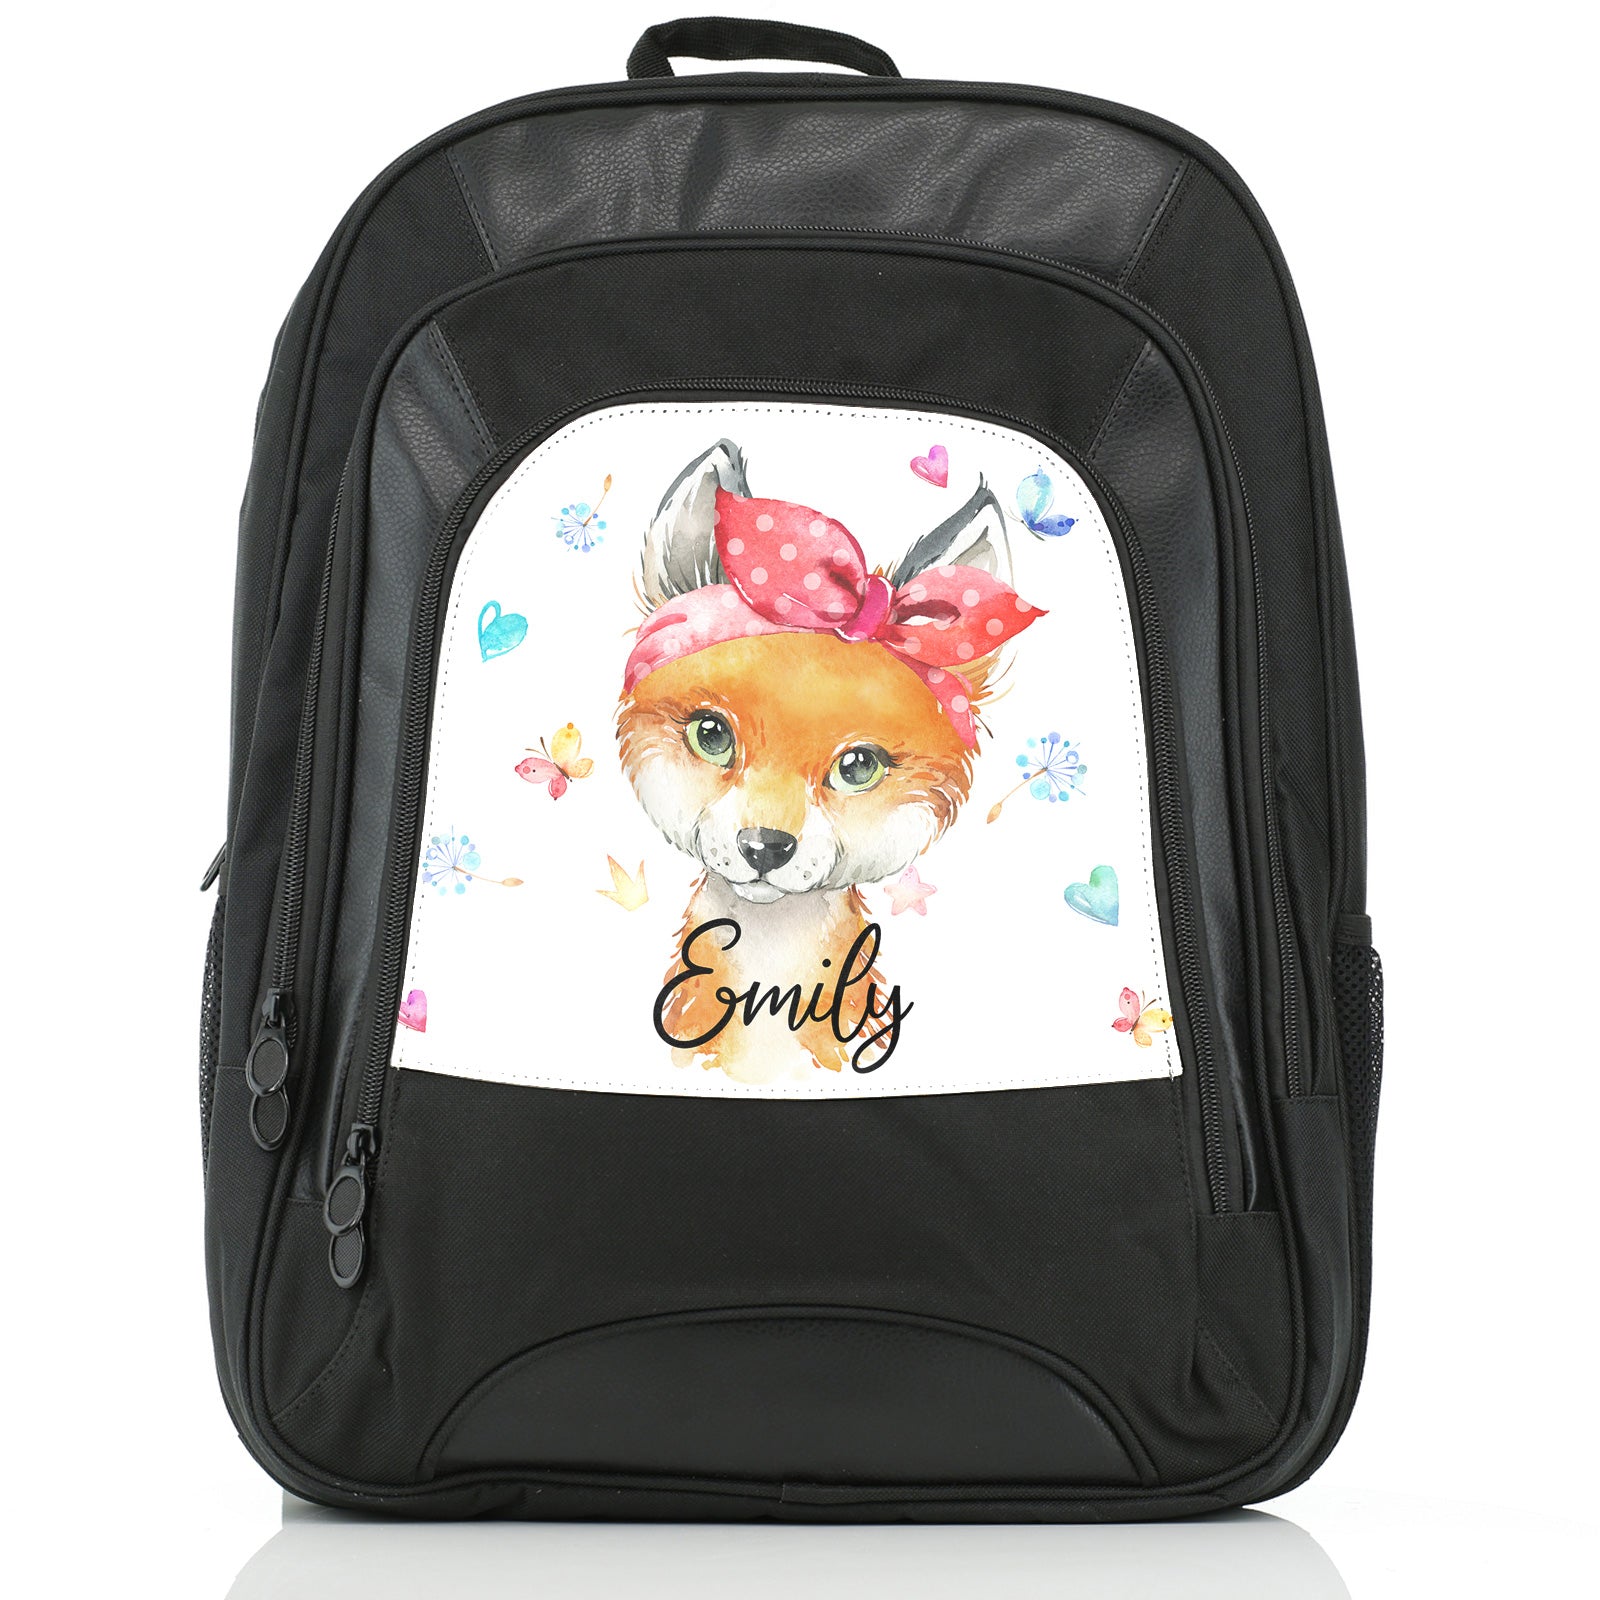 Personalised Large Multifunction Backpack with Red Fox with Hearts Dandelion Butterflies and Cute Text